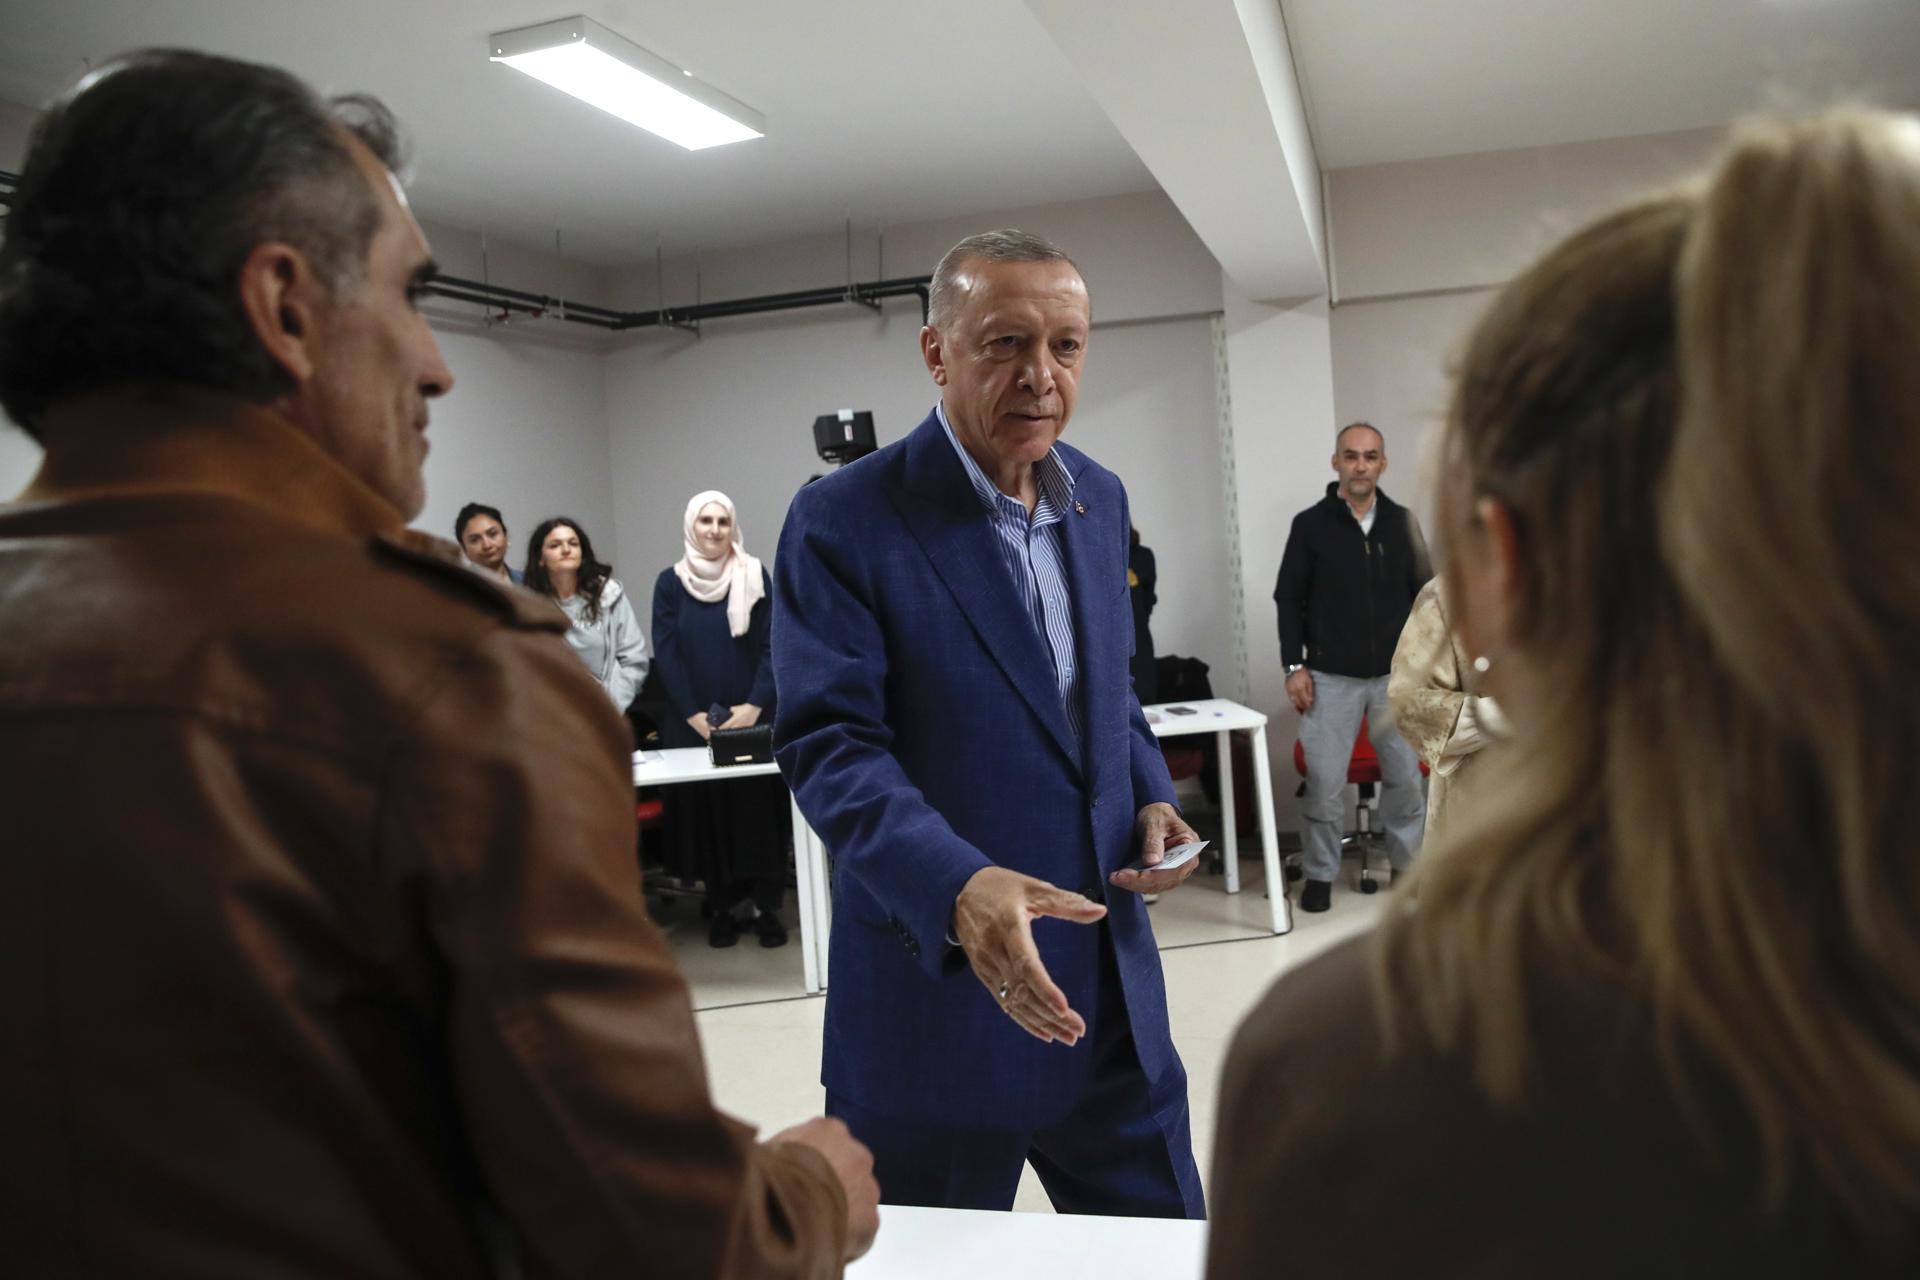 Turkish President Recep Tayyip Erdogan prepares to vote at a polling station during the second round of the presidential election in Istanbul, Turkey, 28 May 2023. EFE/EPA/MURAD SEZER
